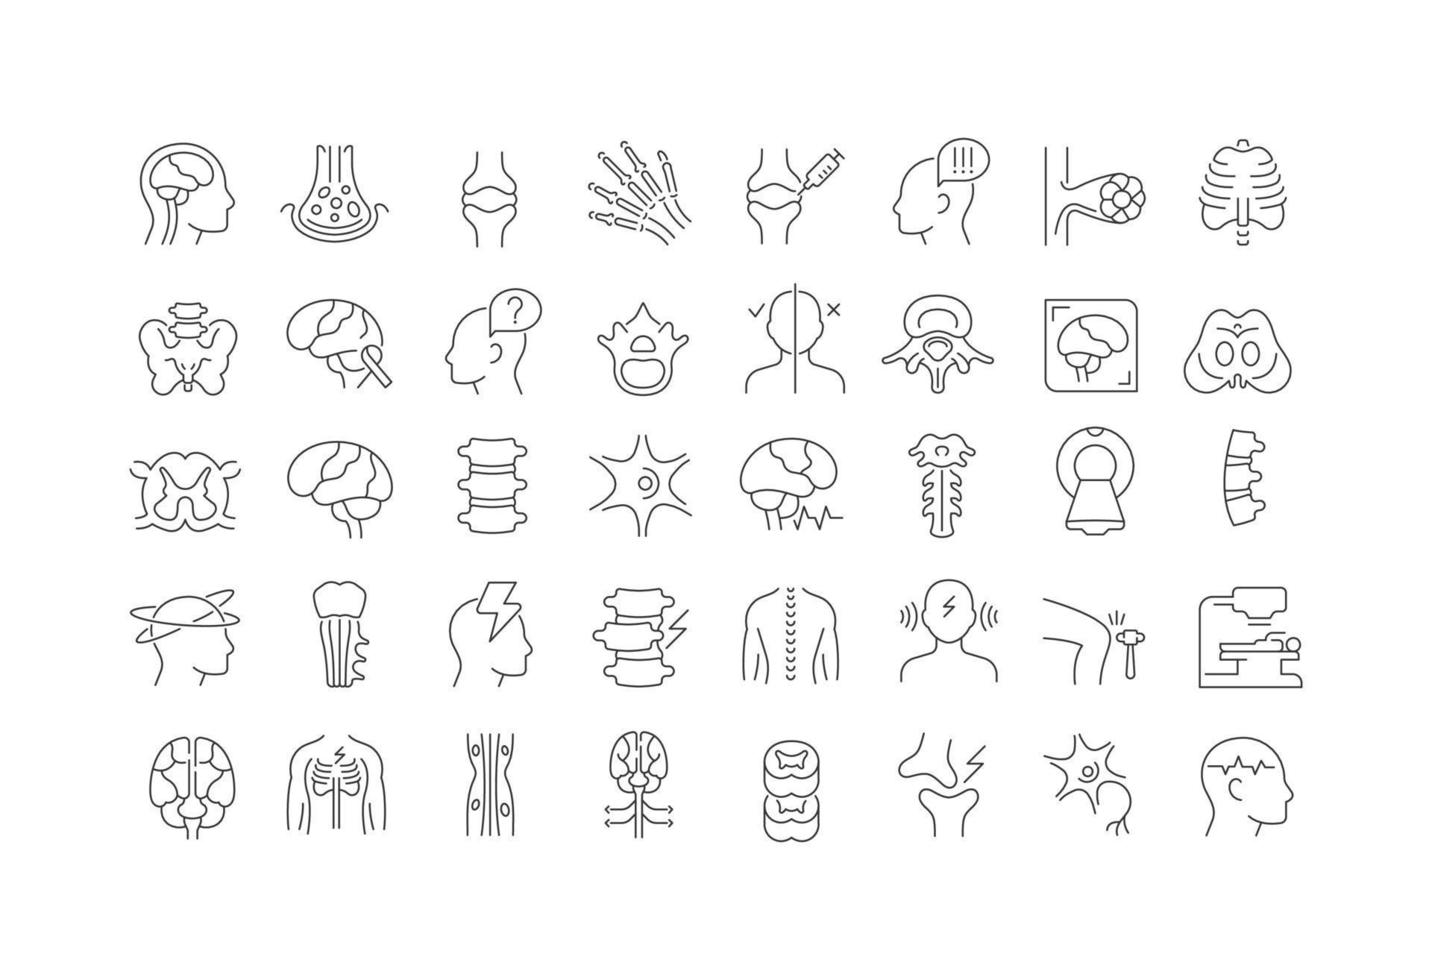 Set of linear icons of Neurology vector